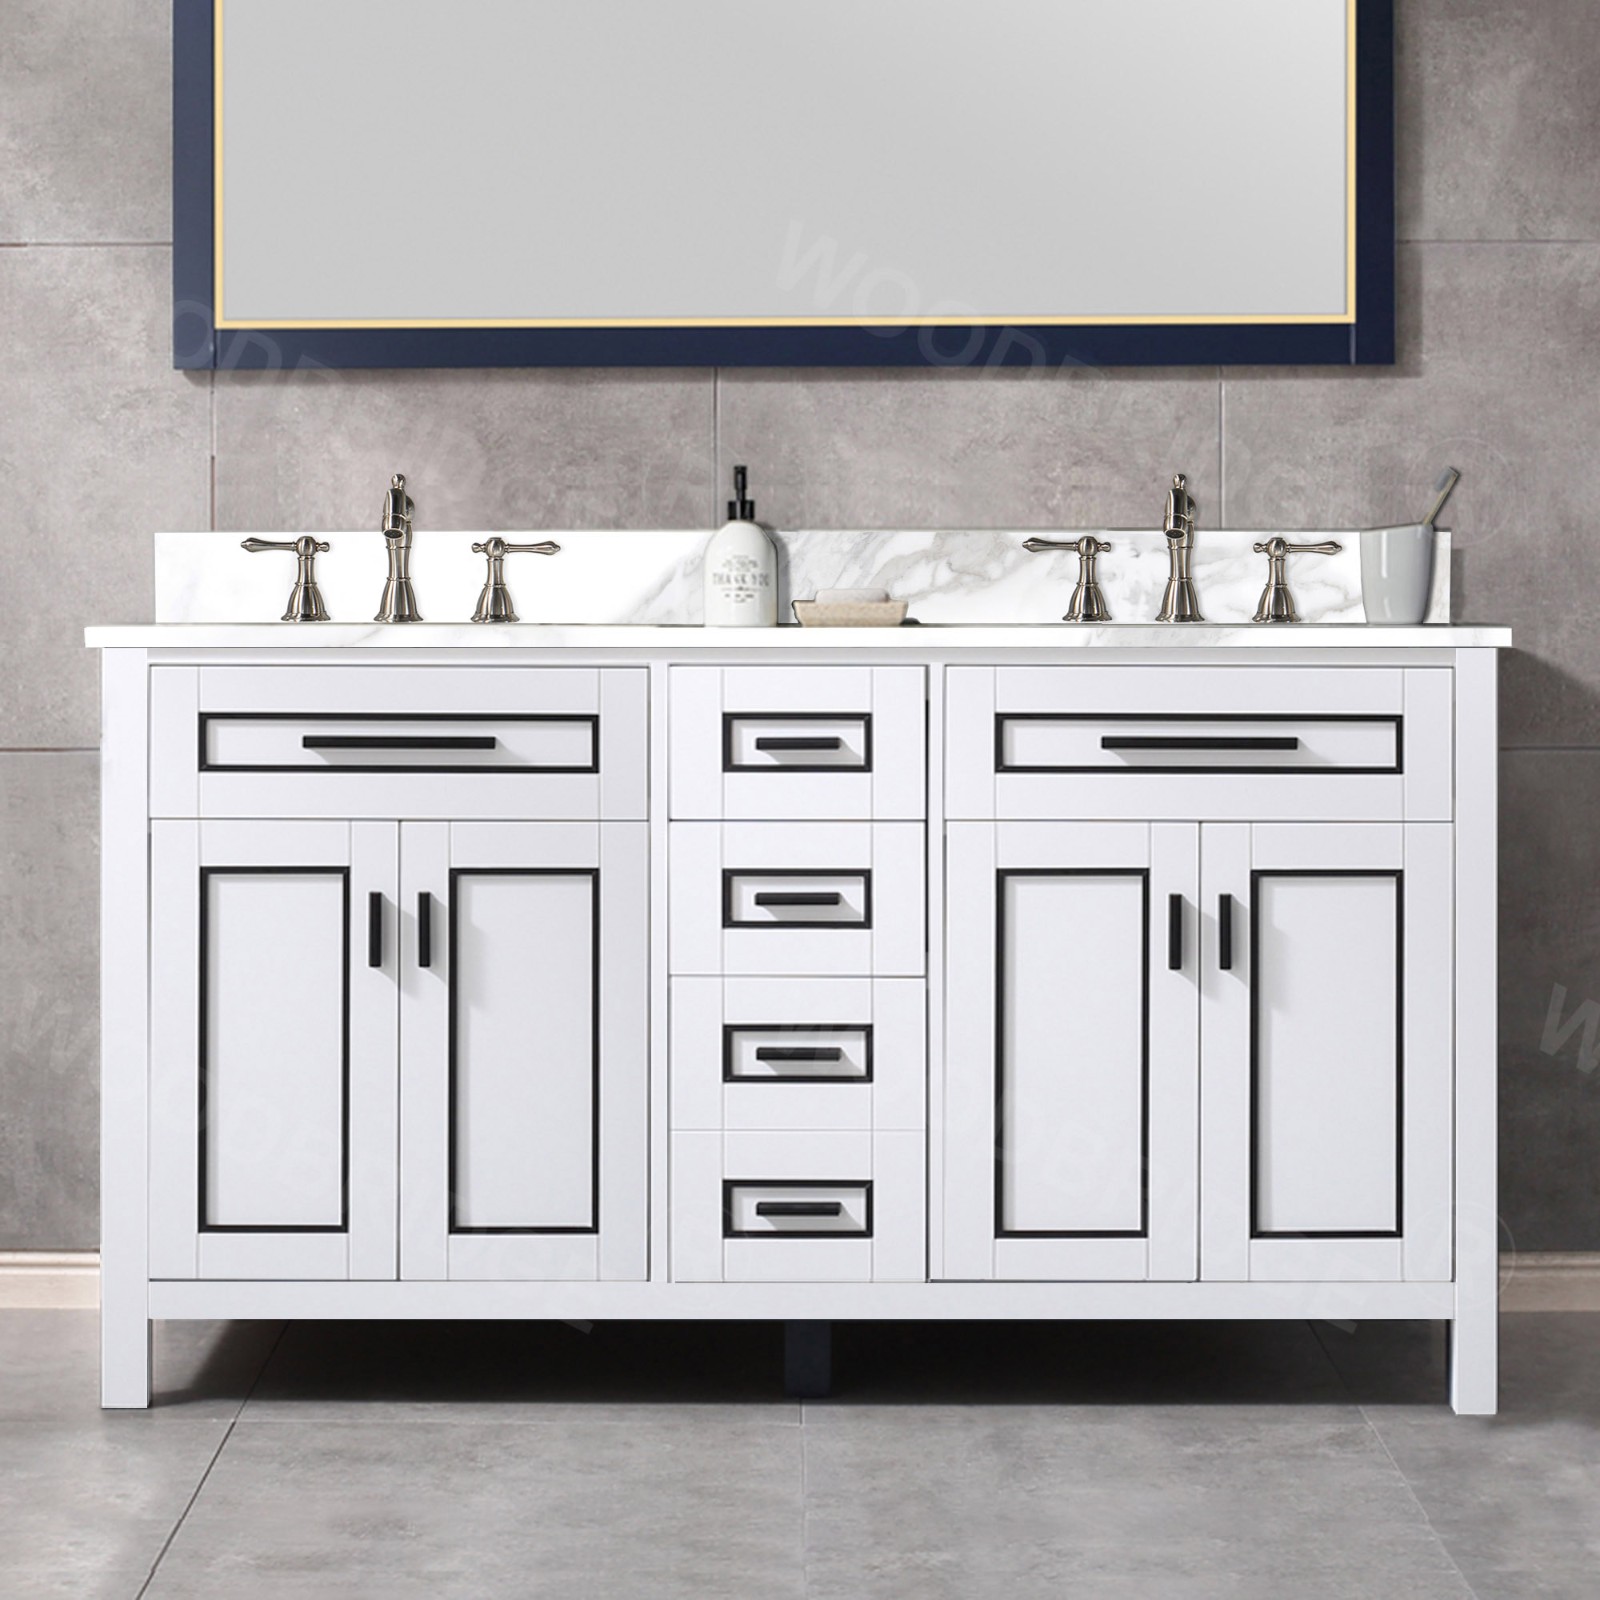  WOODBRIDGE Milan  61” Floor Mounted Single Basin Vanity Set with Solid Wood Cabinet in White and Engineered stone composite Vanity Top in Fish Belly White with Pre-installed Undermount Rectangle Bathroom Sink and Pre-Drilled 3-Hole for 8-inch Widespread F_4594